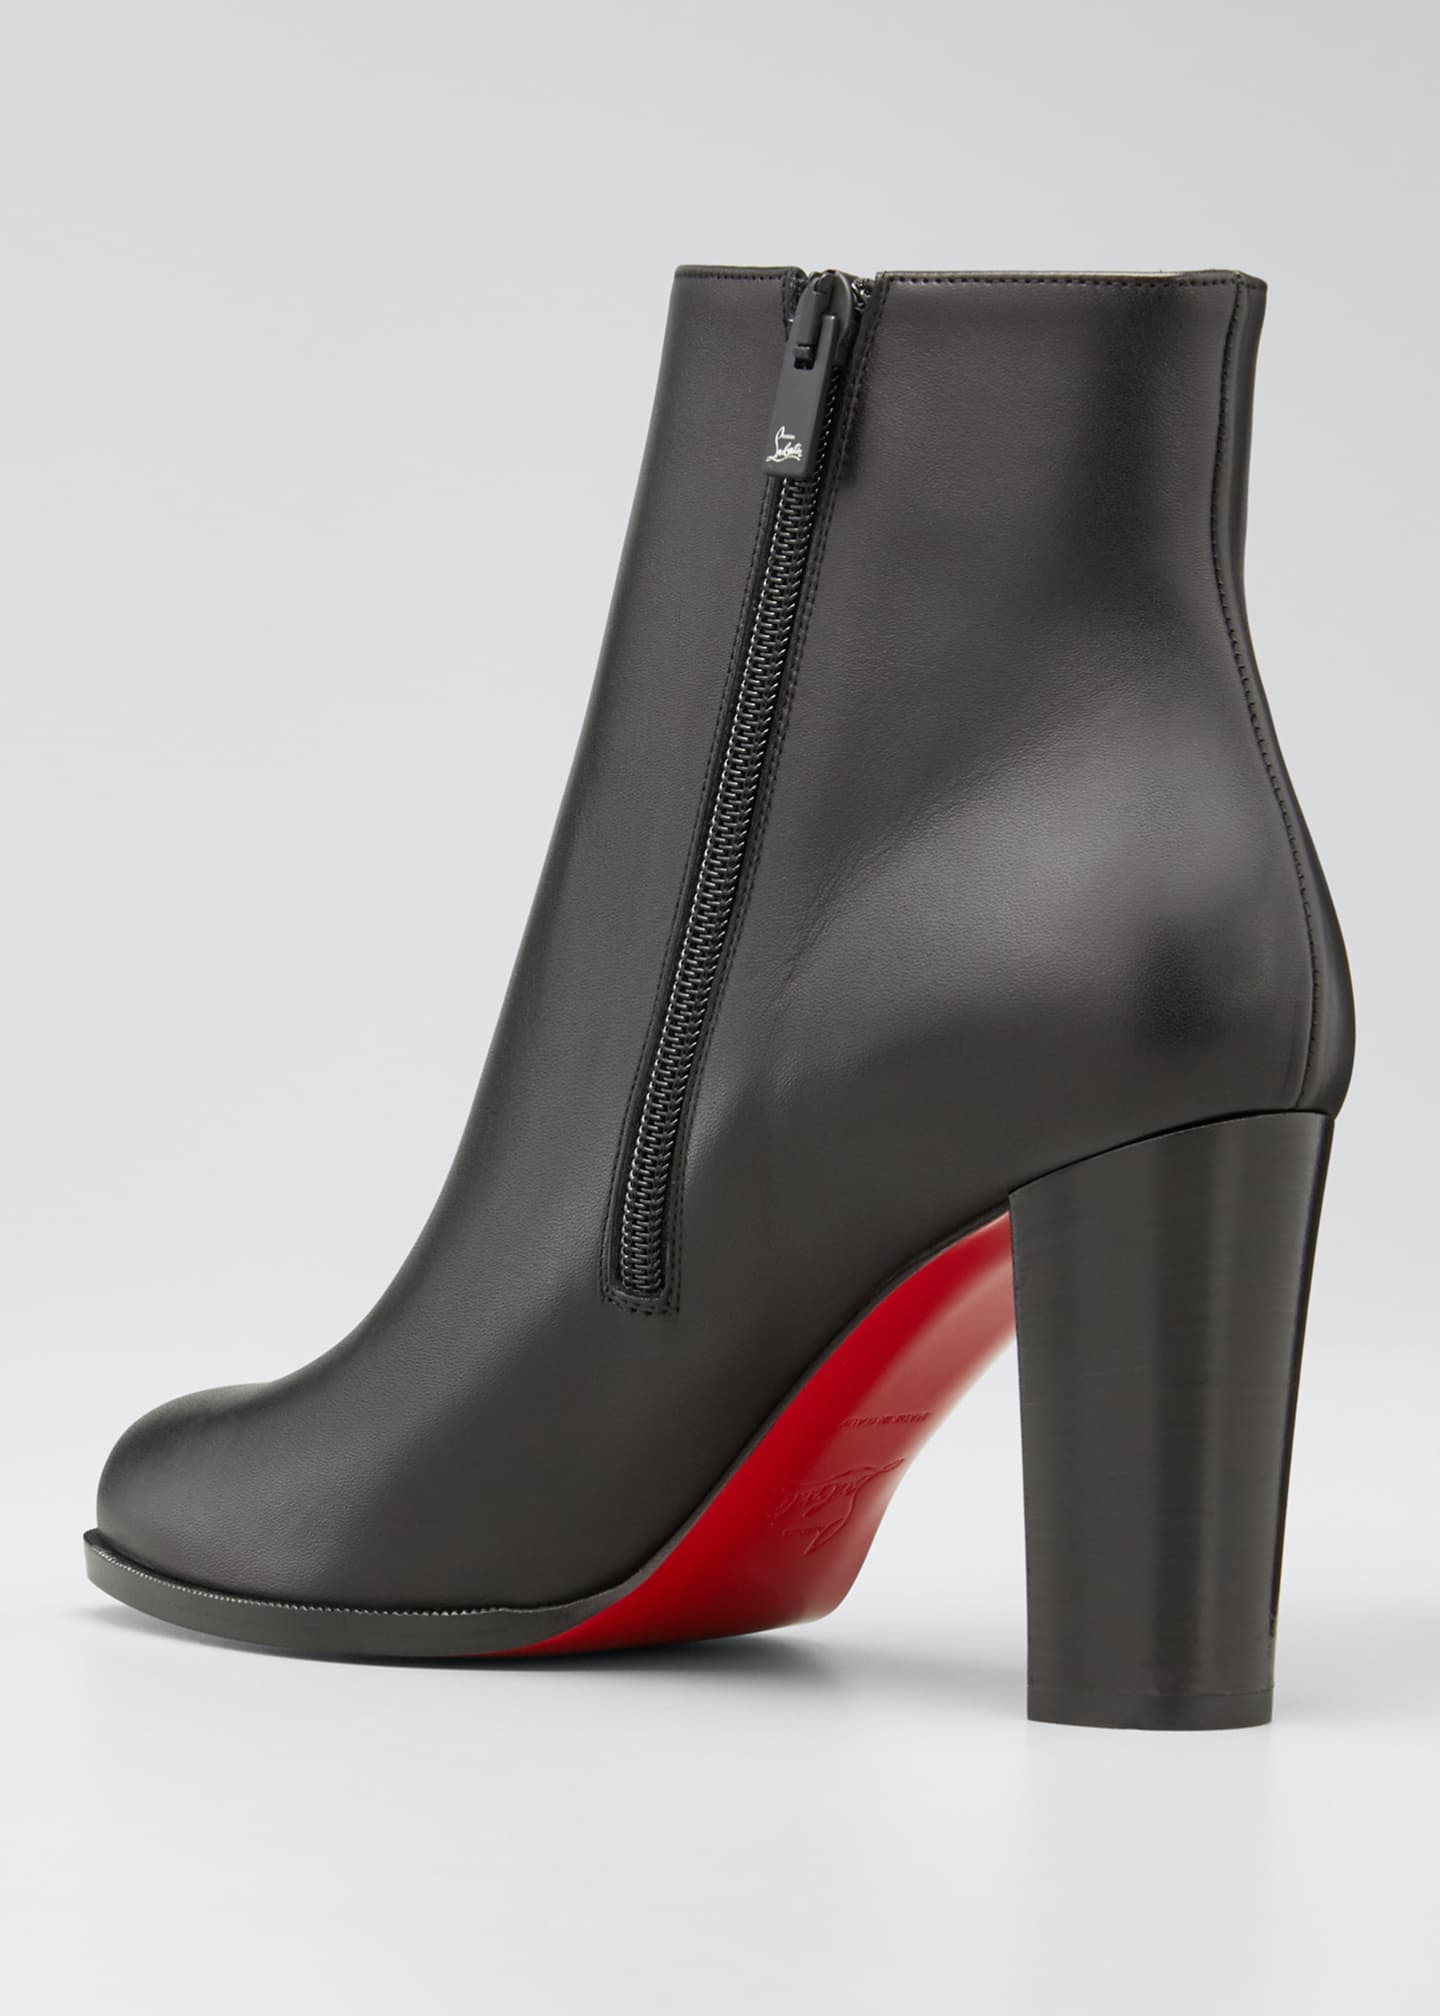 christian louboutin red bottom boots